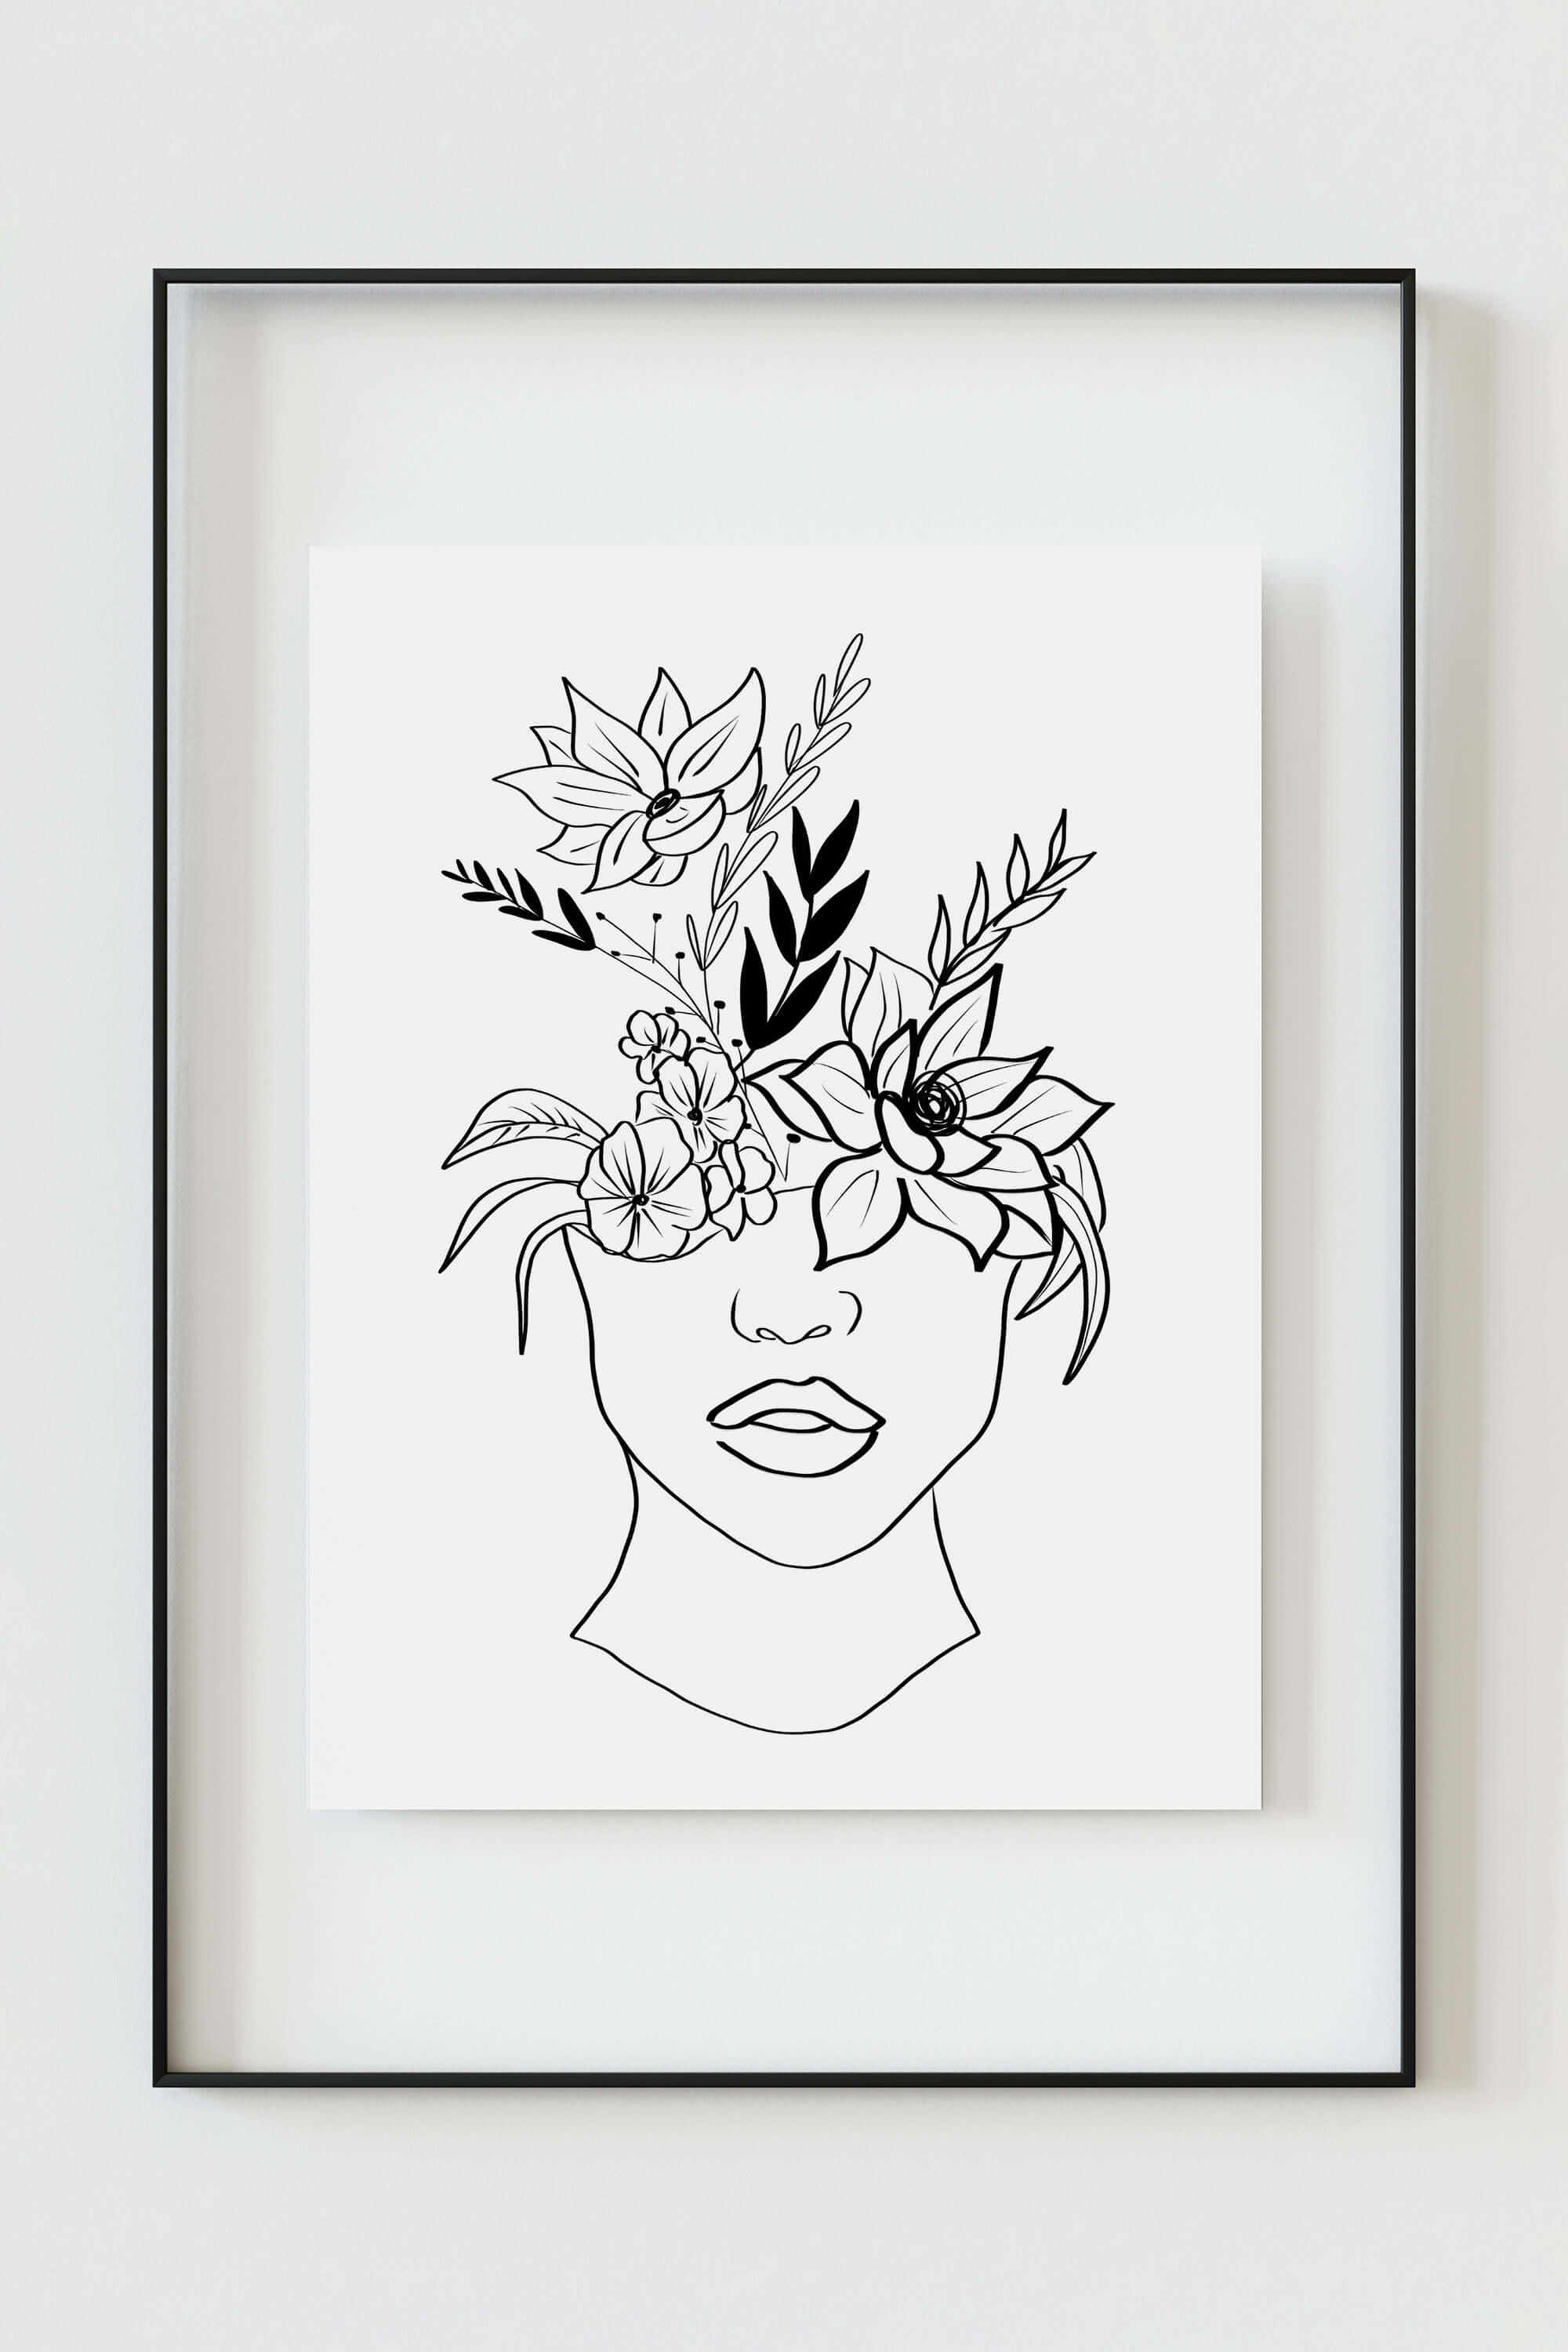 Monochrome poster showcasing a confident woman with red lips and a floral head. Nature-inspired wall art that brings glamour and confidence to your living space.